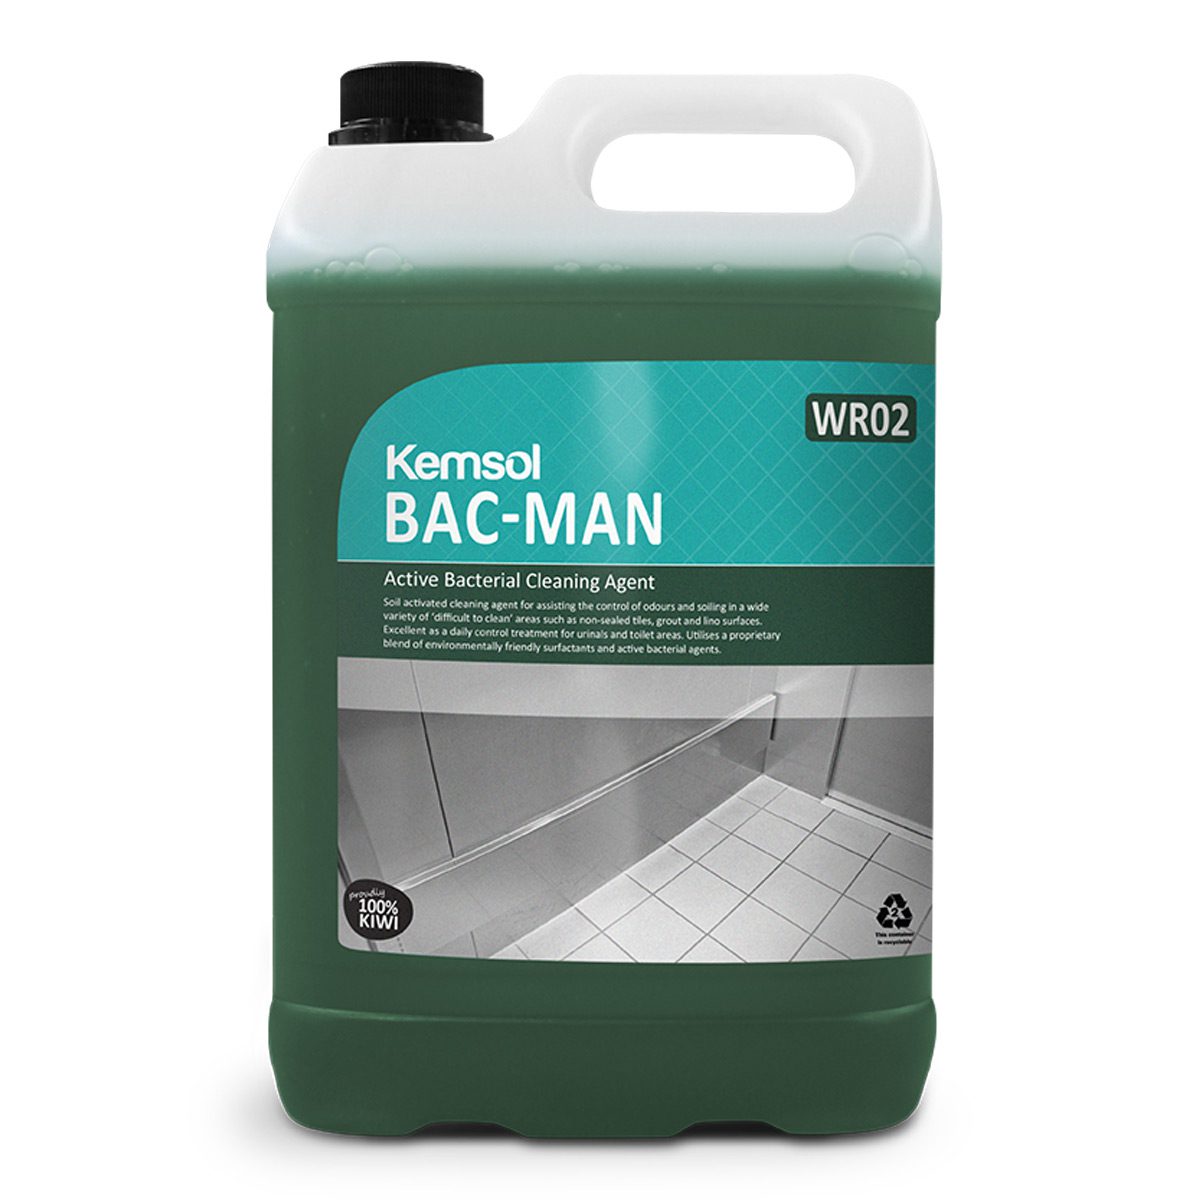 cleaning-products-disinfectants-and-sanitisers-kemsol-bac-man-cleaner-5L-litre-soil-activated-cleaning-agent-daily-control-treatment-for-urinals-and-toilet-areas-vjs-distributors-KBACM